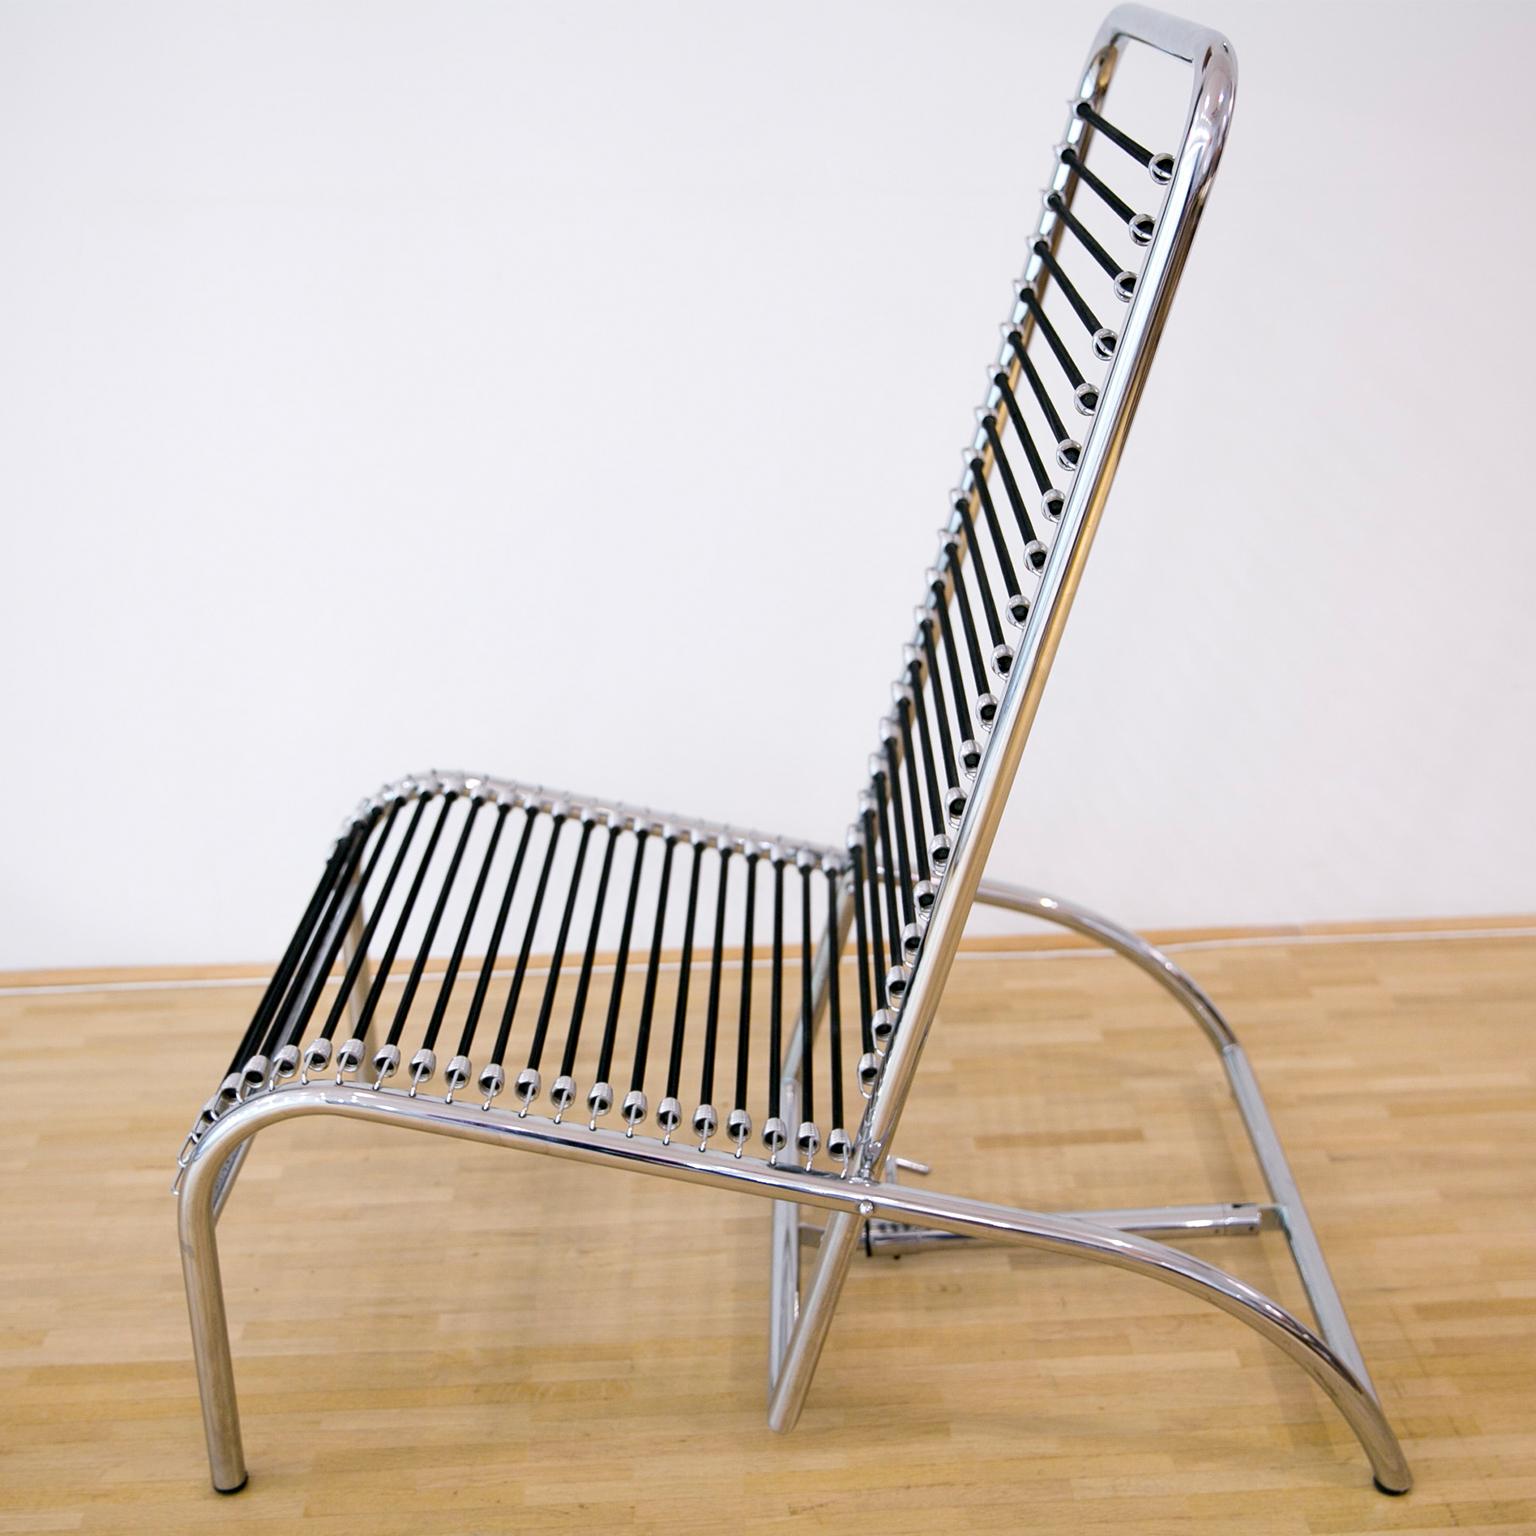 A reclining chair by René Herbst made of chrome tube and sandows. Created in the late 1920’s by french architect René Herbst aka “the man of steel” he made a lot of different chairs out of metal tube which allowed mass production of furniture and